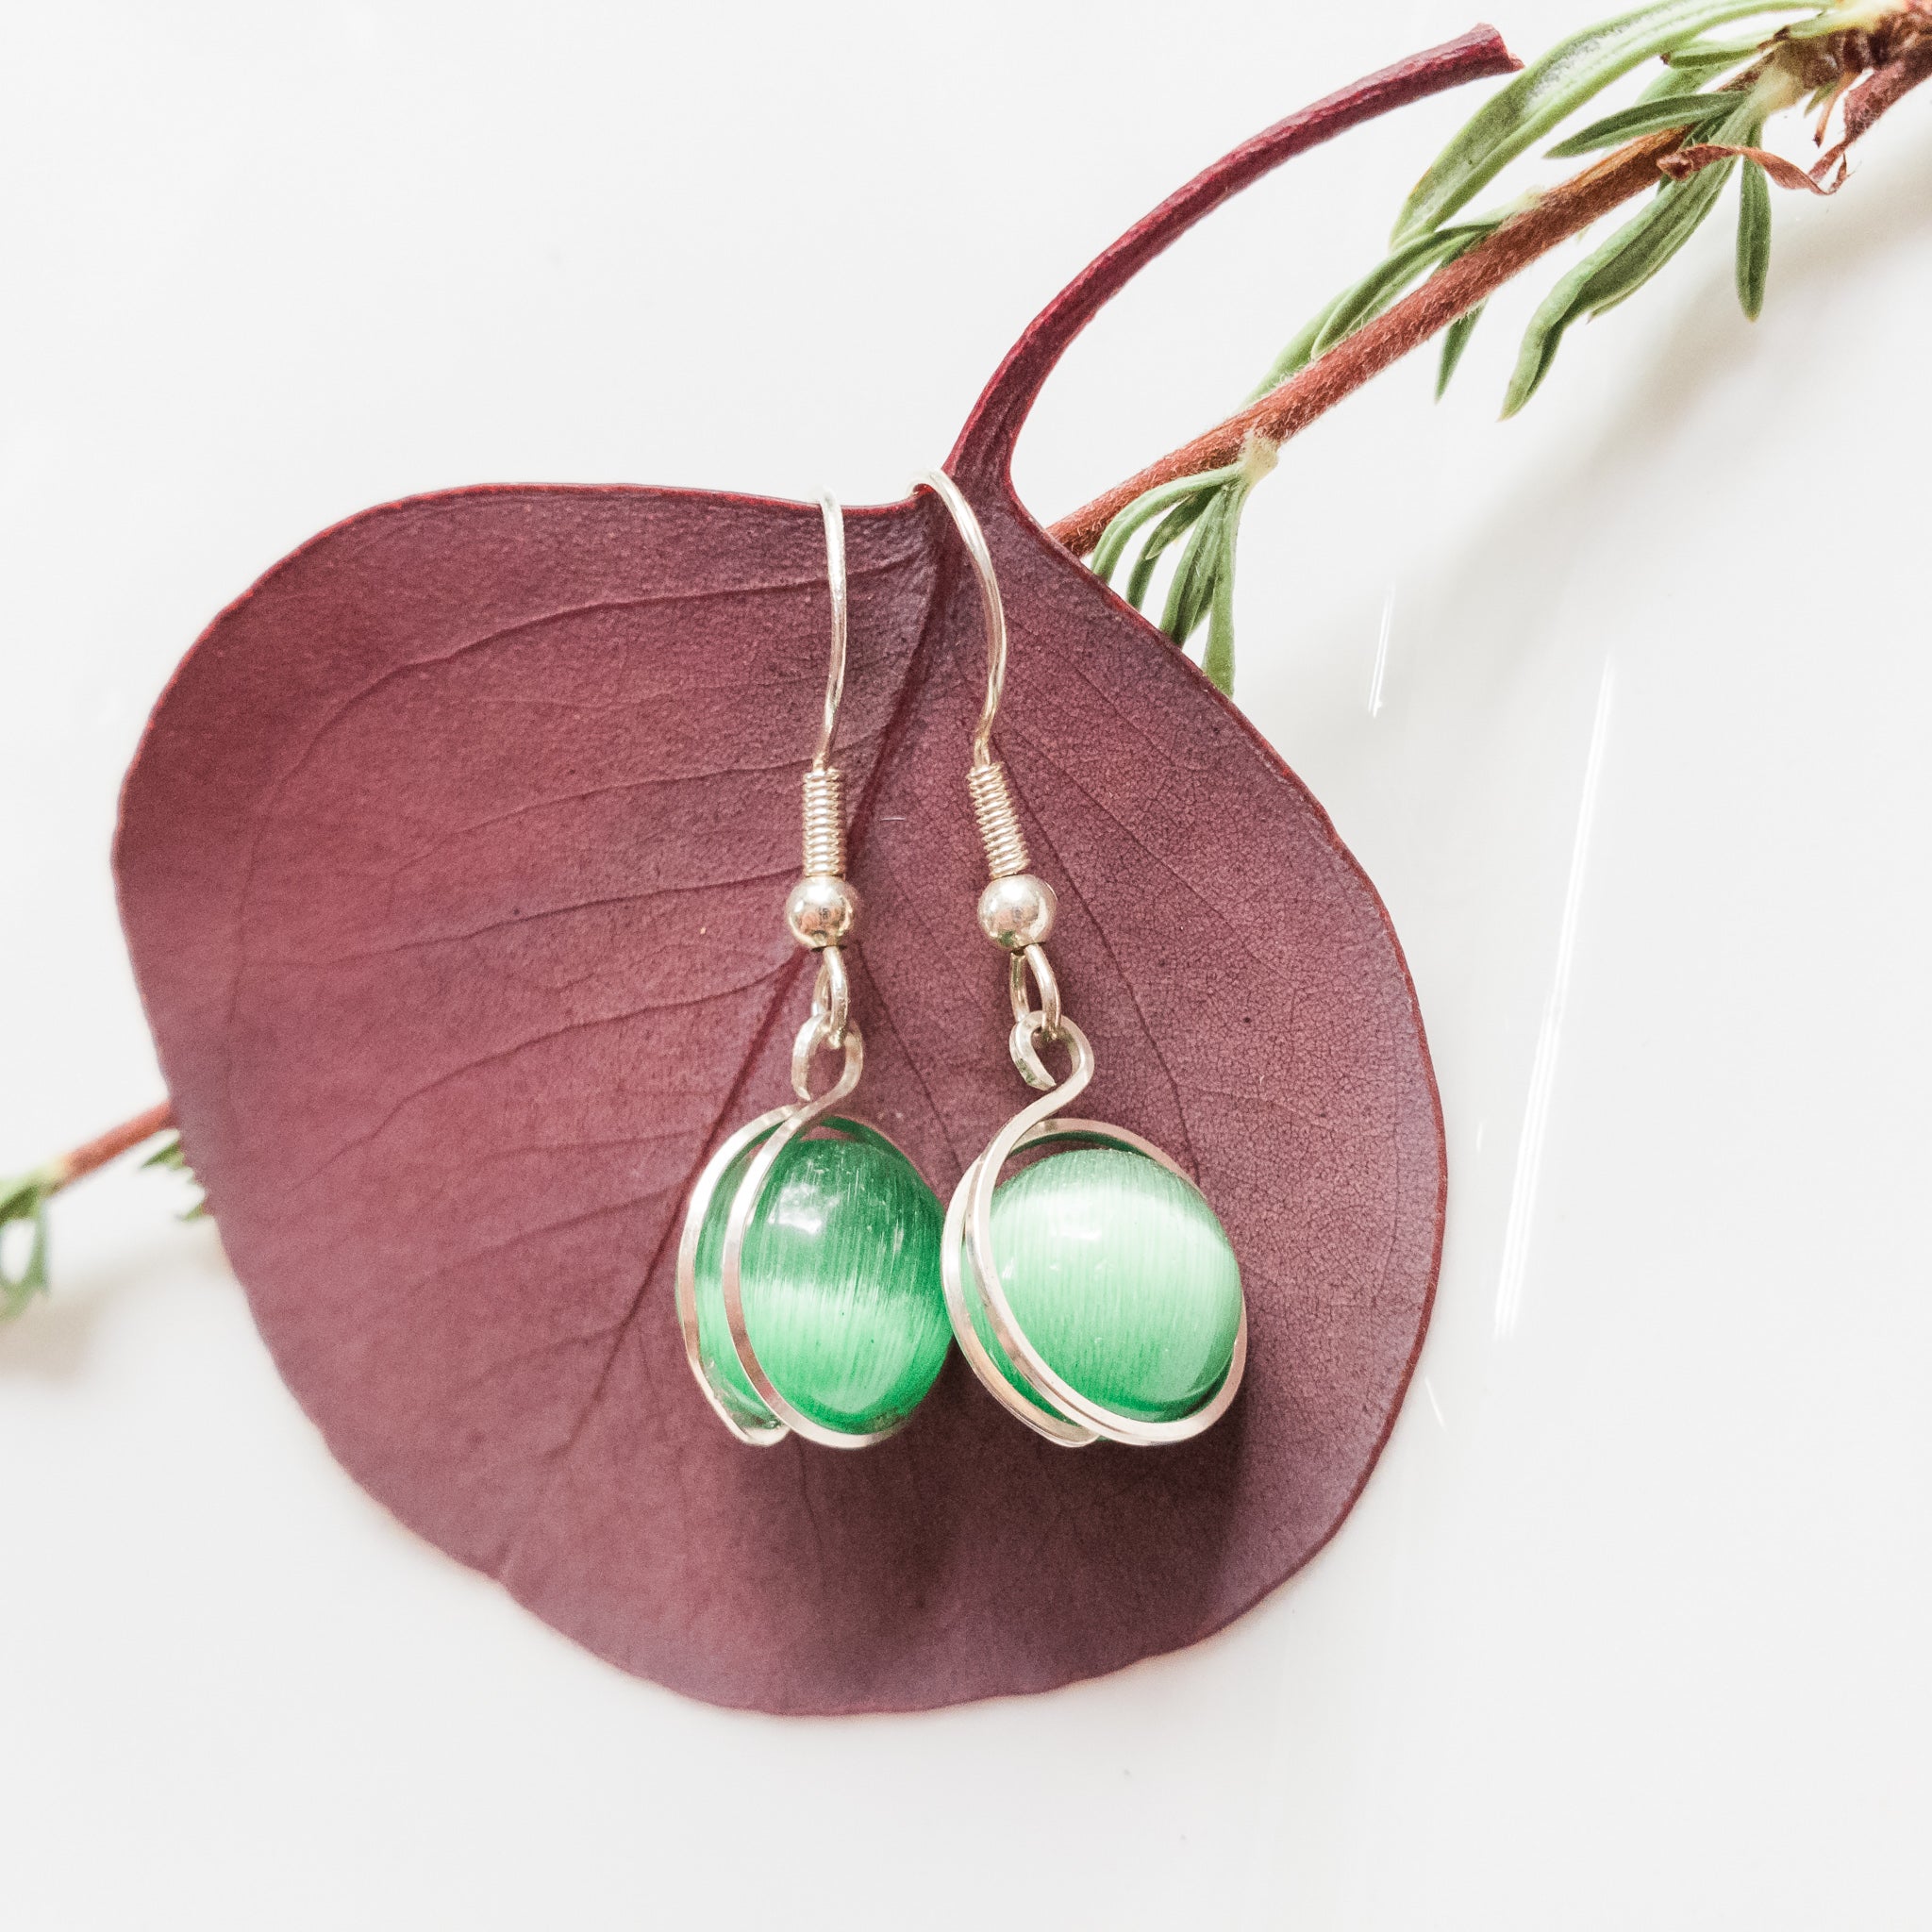 Rio Collection - Green Cats Eye Earrings Wrapped in Sterling Silver - Close-up view - BellaChel Jeweler